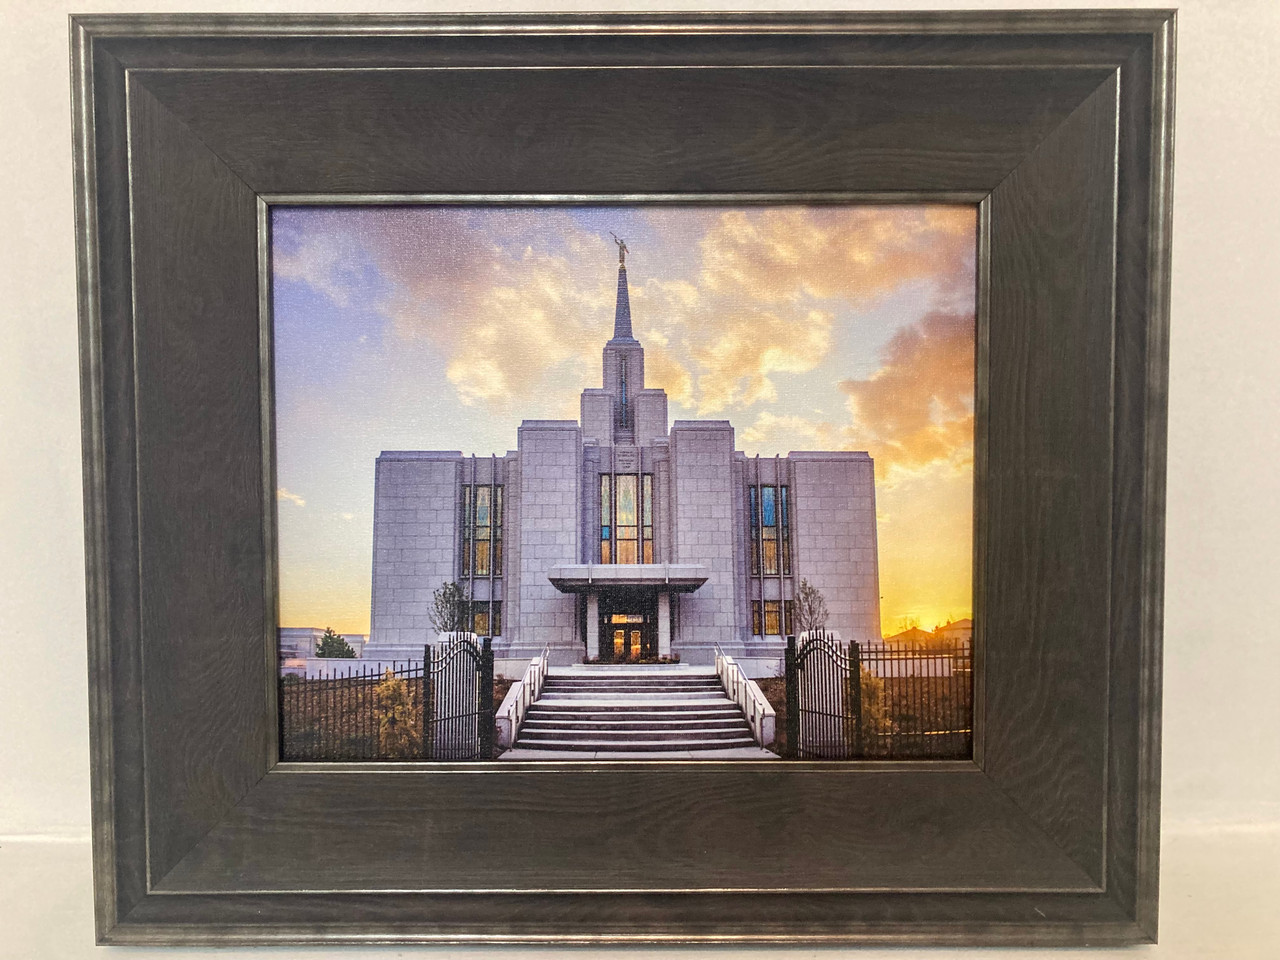 Calgary Temple - Gold Sunbursts by Scott Jarvie 12x15 Framed Canvas (While Supplies Last)